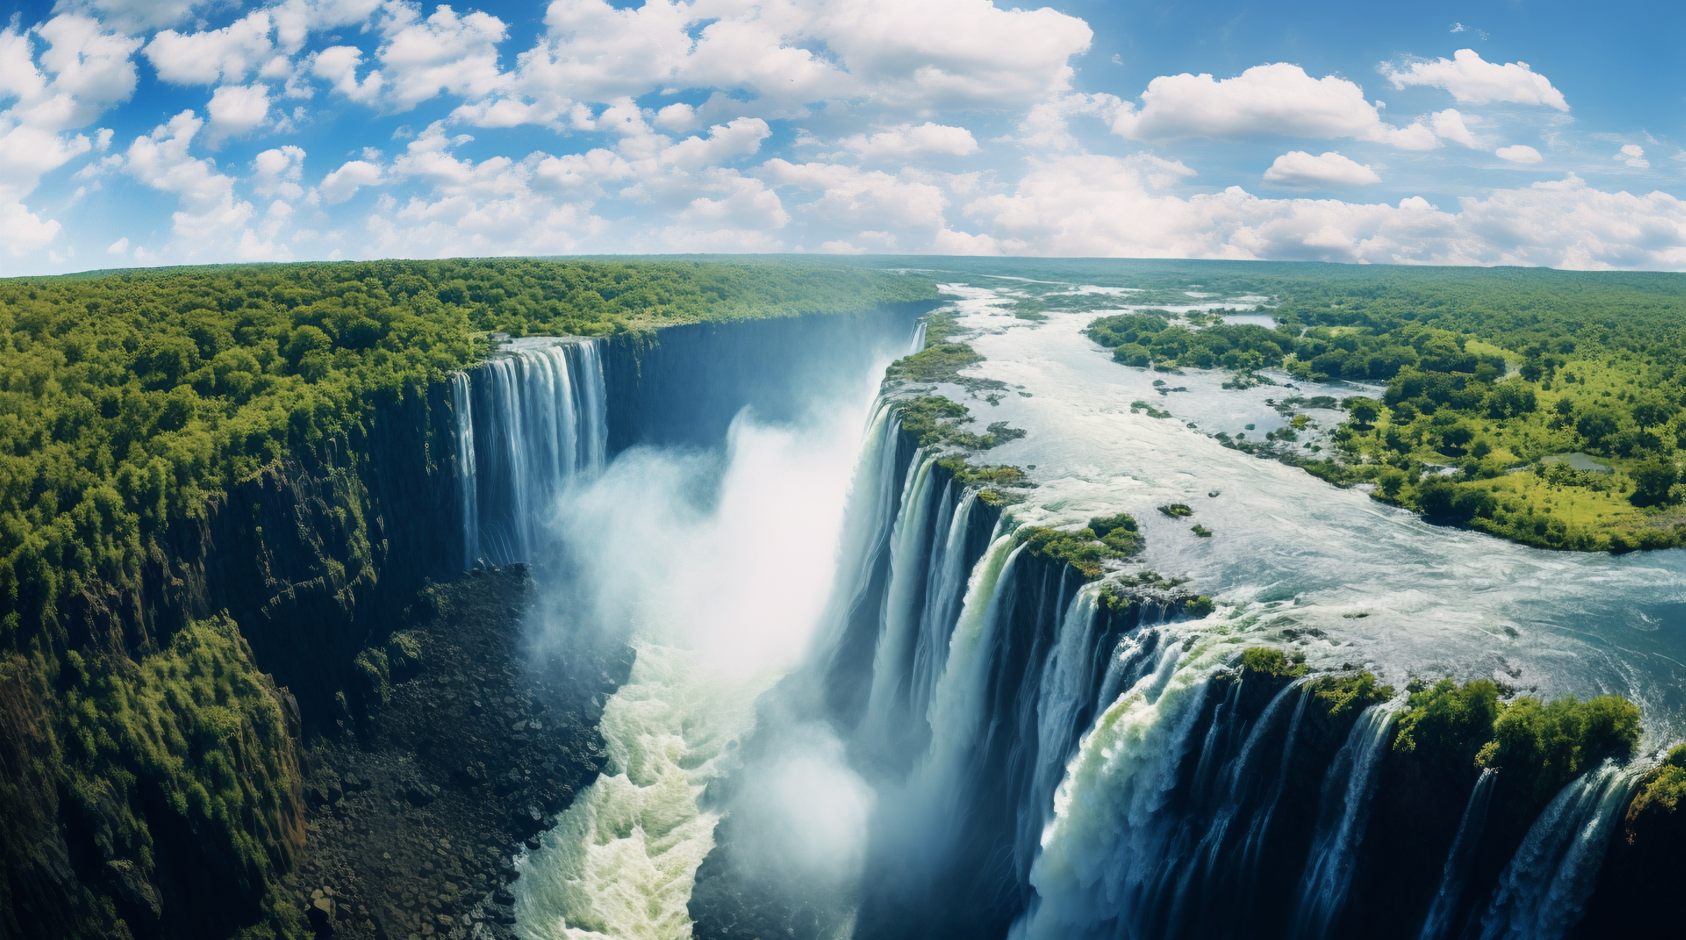 Victoria Falls Location, Interesting Features and Facts